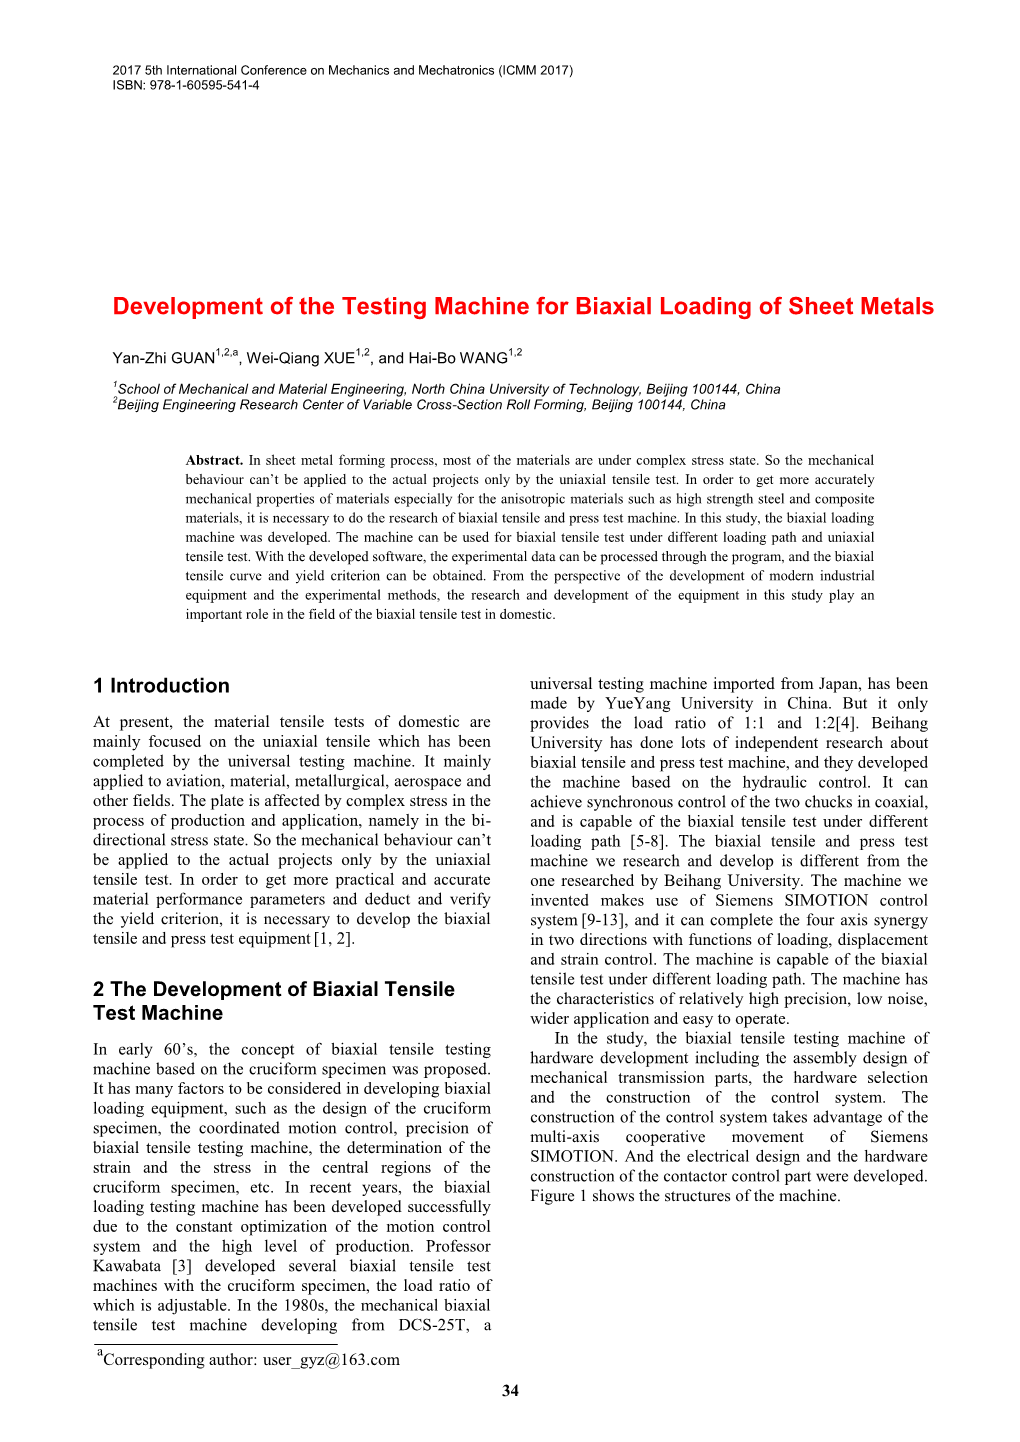 Development of the Testing Machine for Biaxial Loading of Sheet Metals